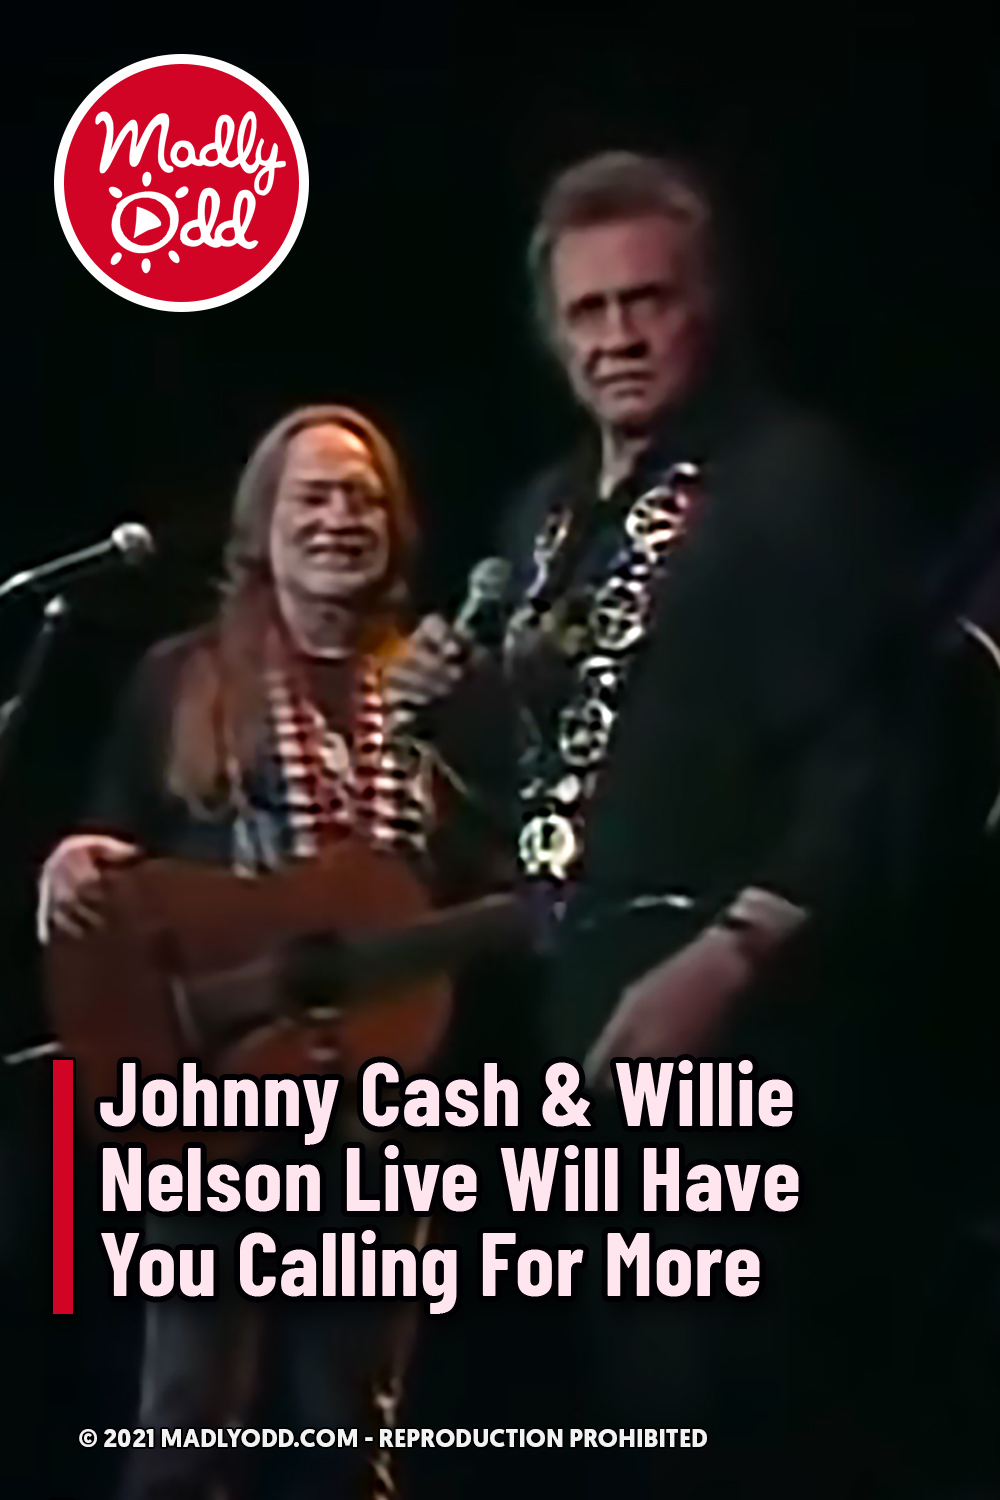 Johnny Cash & Willie Nelson Live Will Have You Calling For More